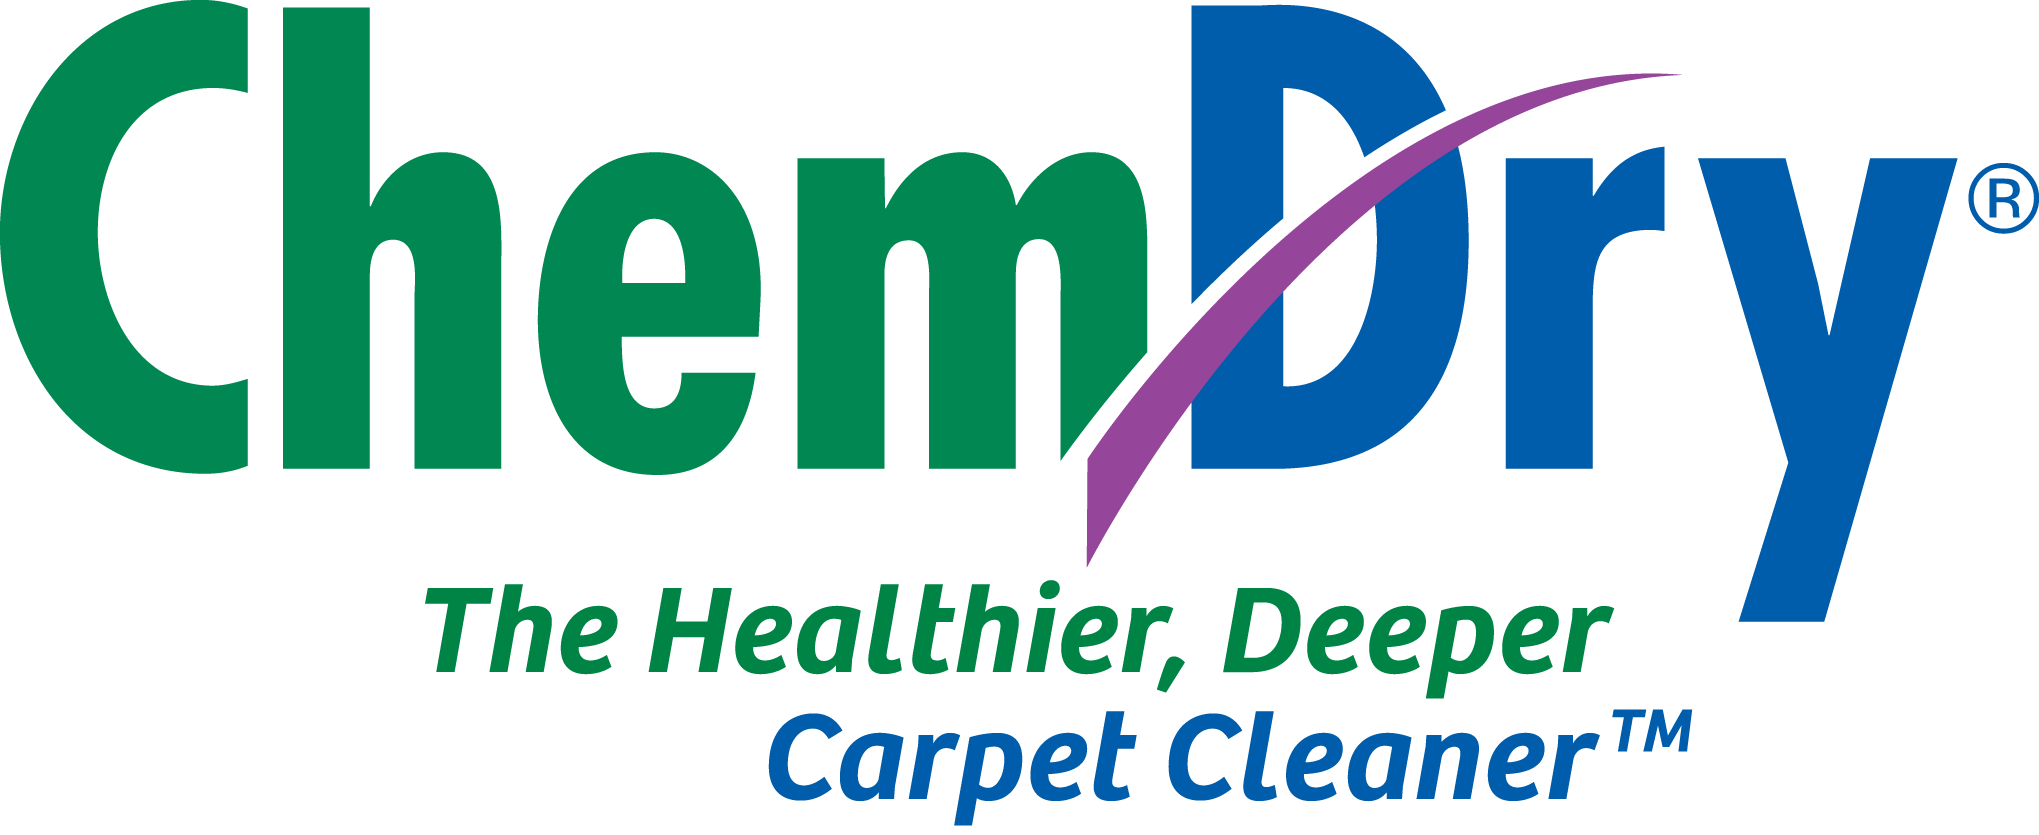 Carpet Cleaning Fort Wayne The Healthier, Deeper Carpet Cleaner Chem-Dry of Allen County